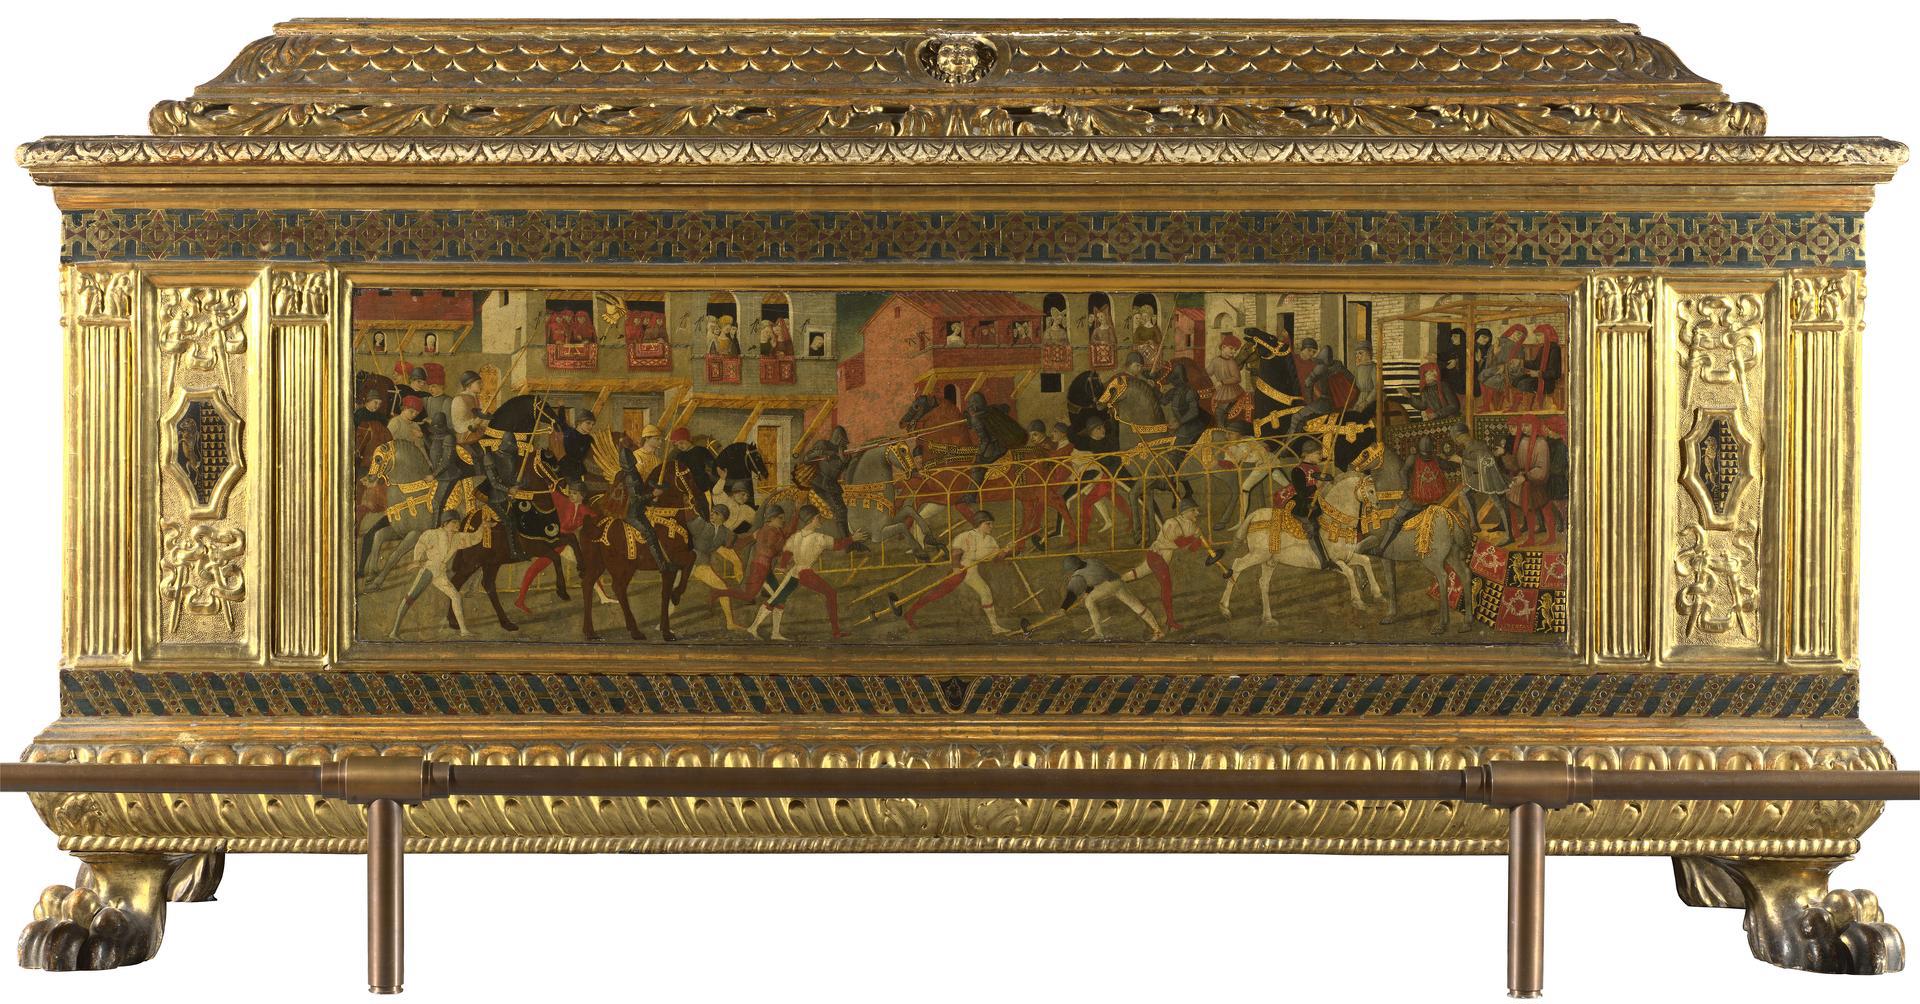 Cassone with a Tournament Scene by Italian, Florentine